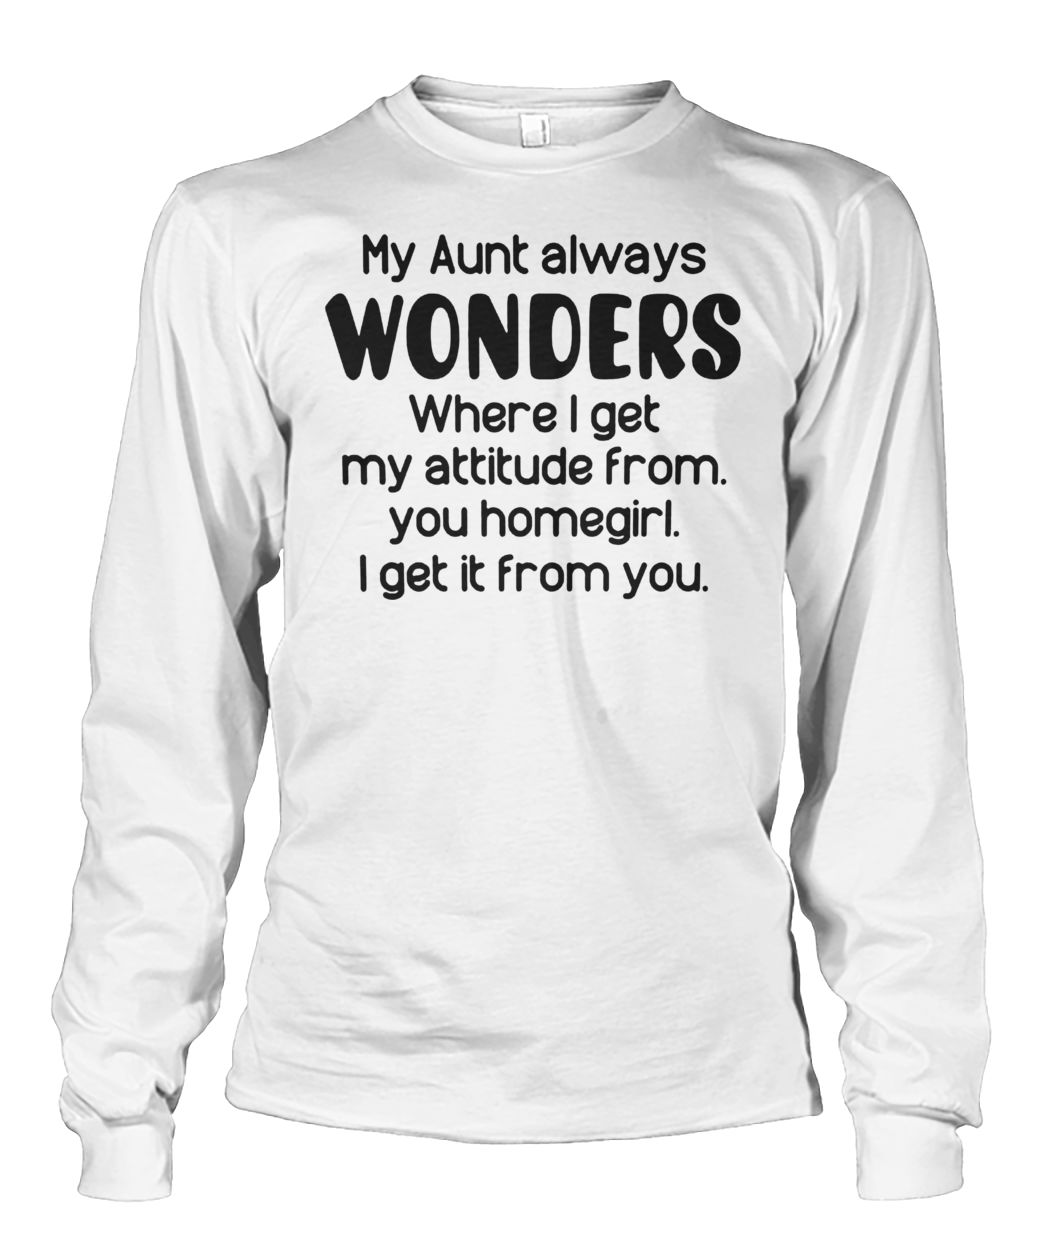 My aunt always wonders where I get my attitude from you homegirl I get it from you unisex long sleeve